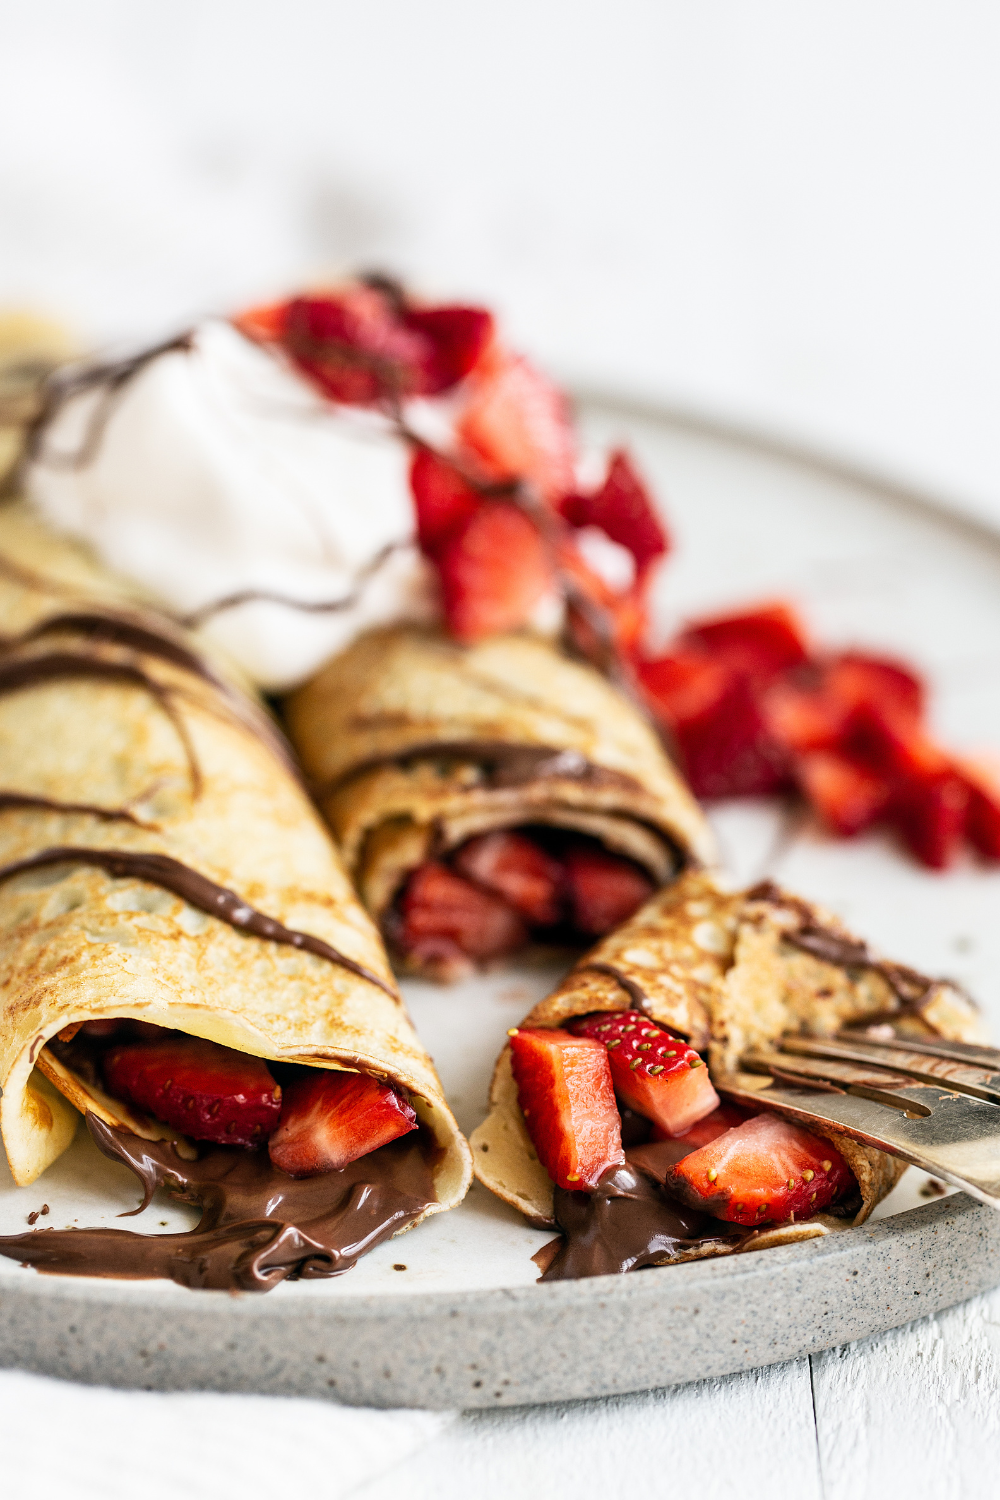 two rolled crepes filled with chocolate and fresh strawberries, with a piece on a fork ready to enjoy.